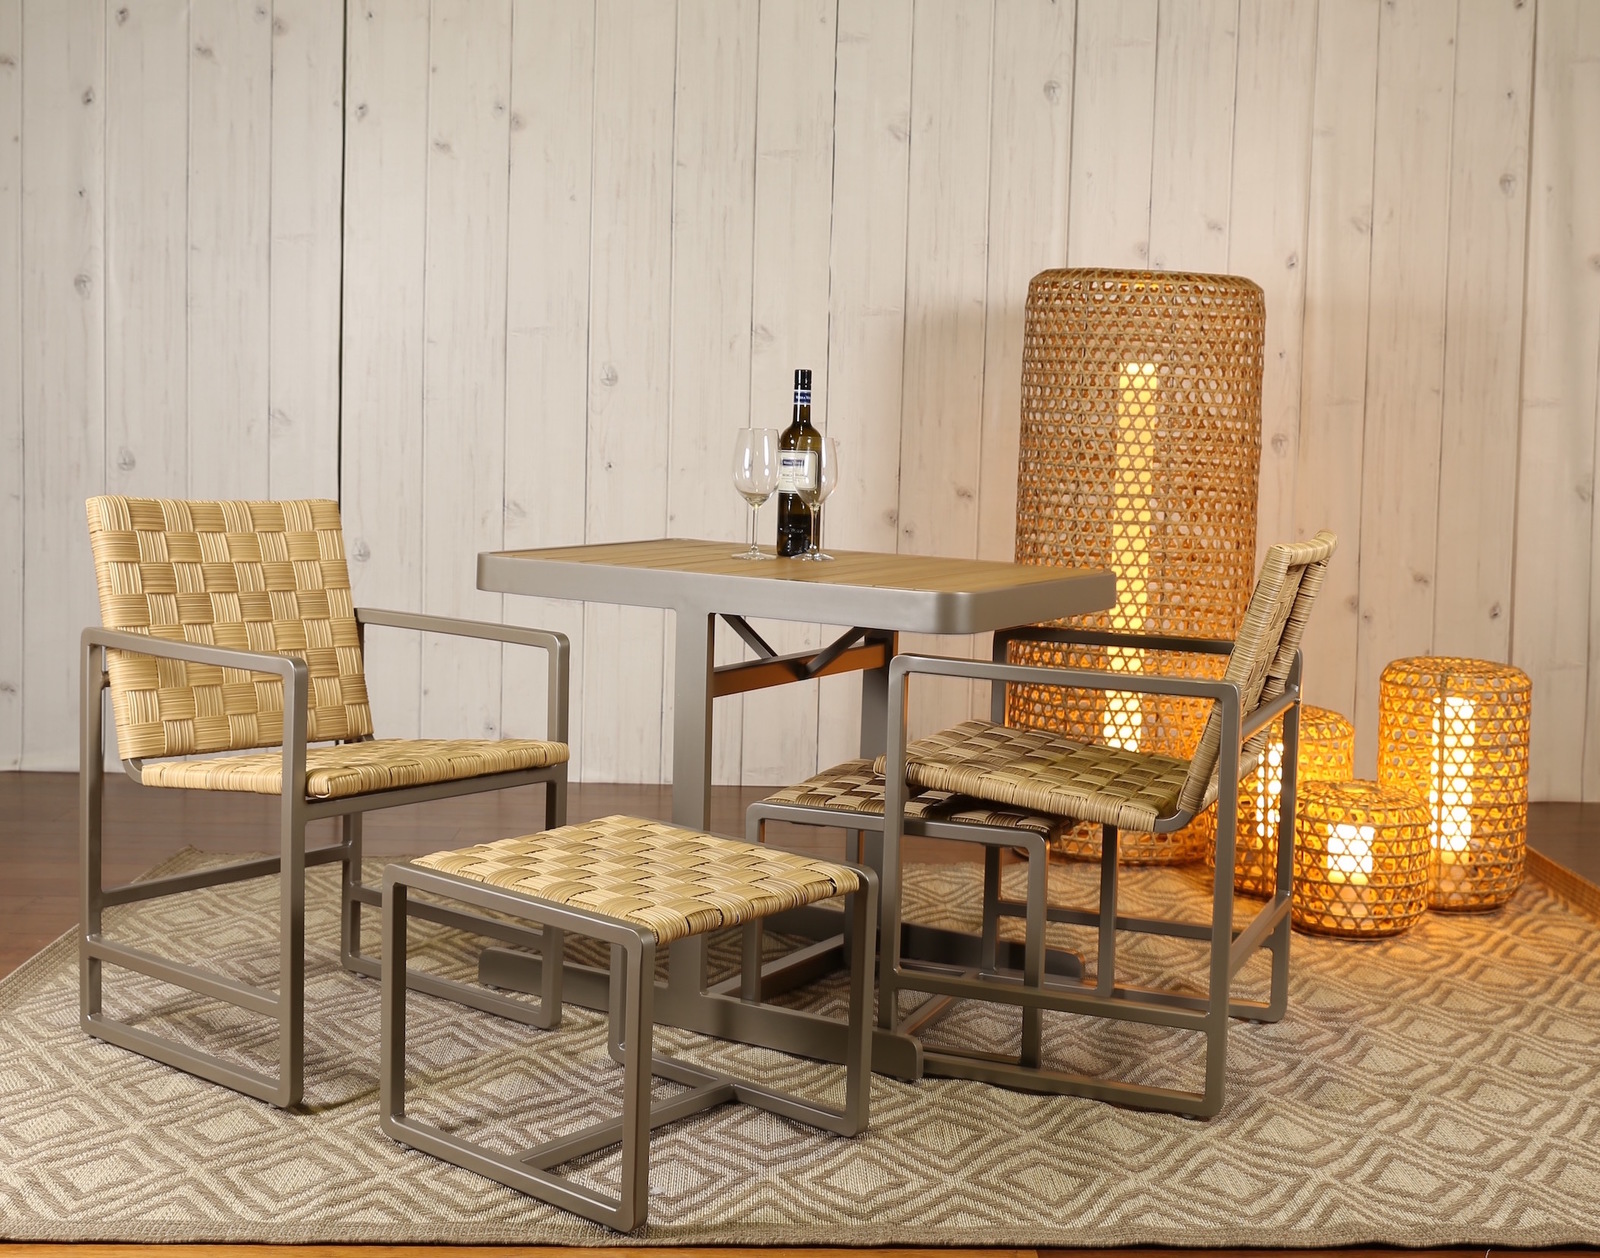 SHELBY | OUTDOOR DINING SETTING